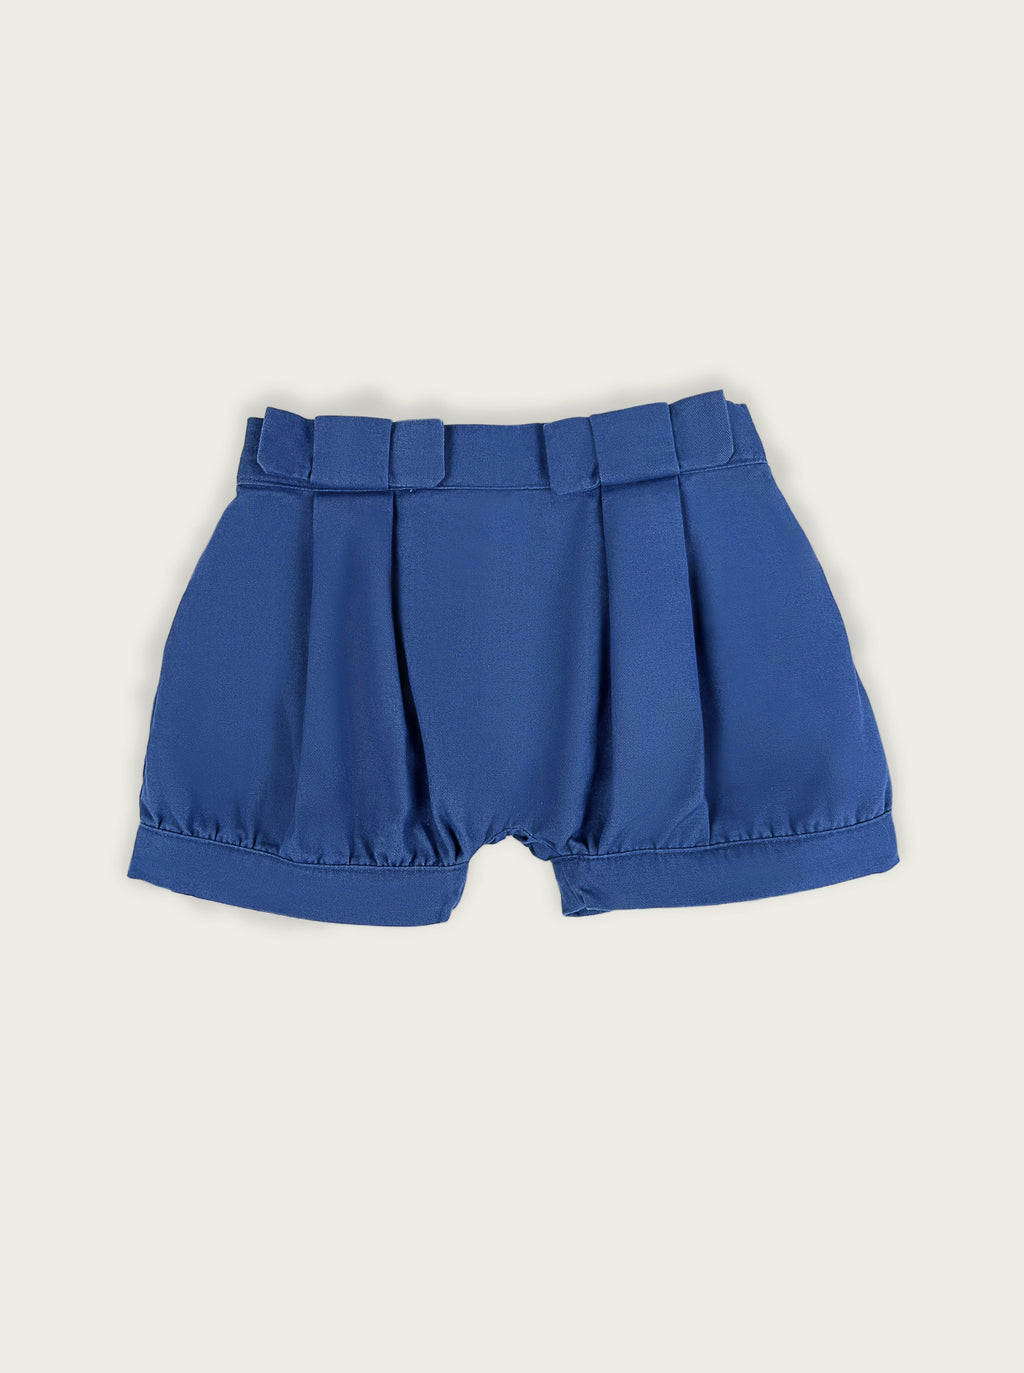 Bow Bloomer Marine Blue Children's Pants Front